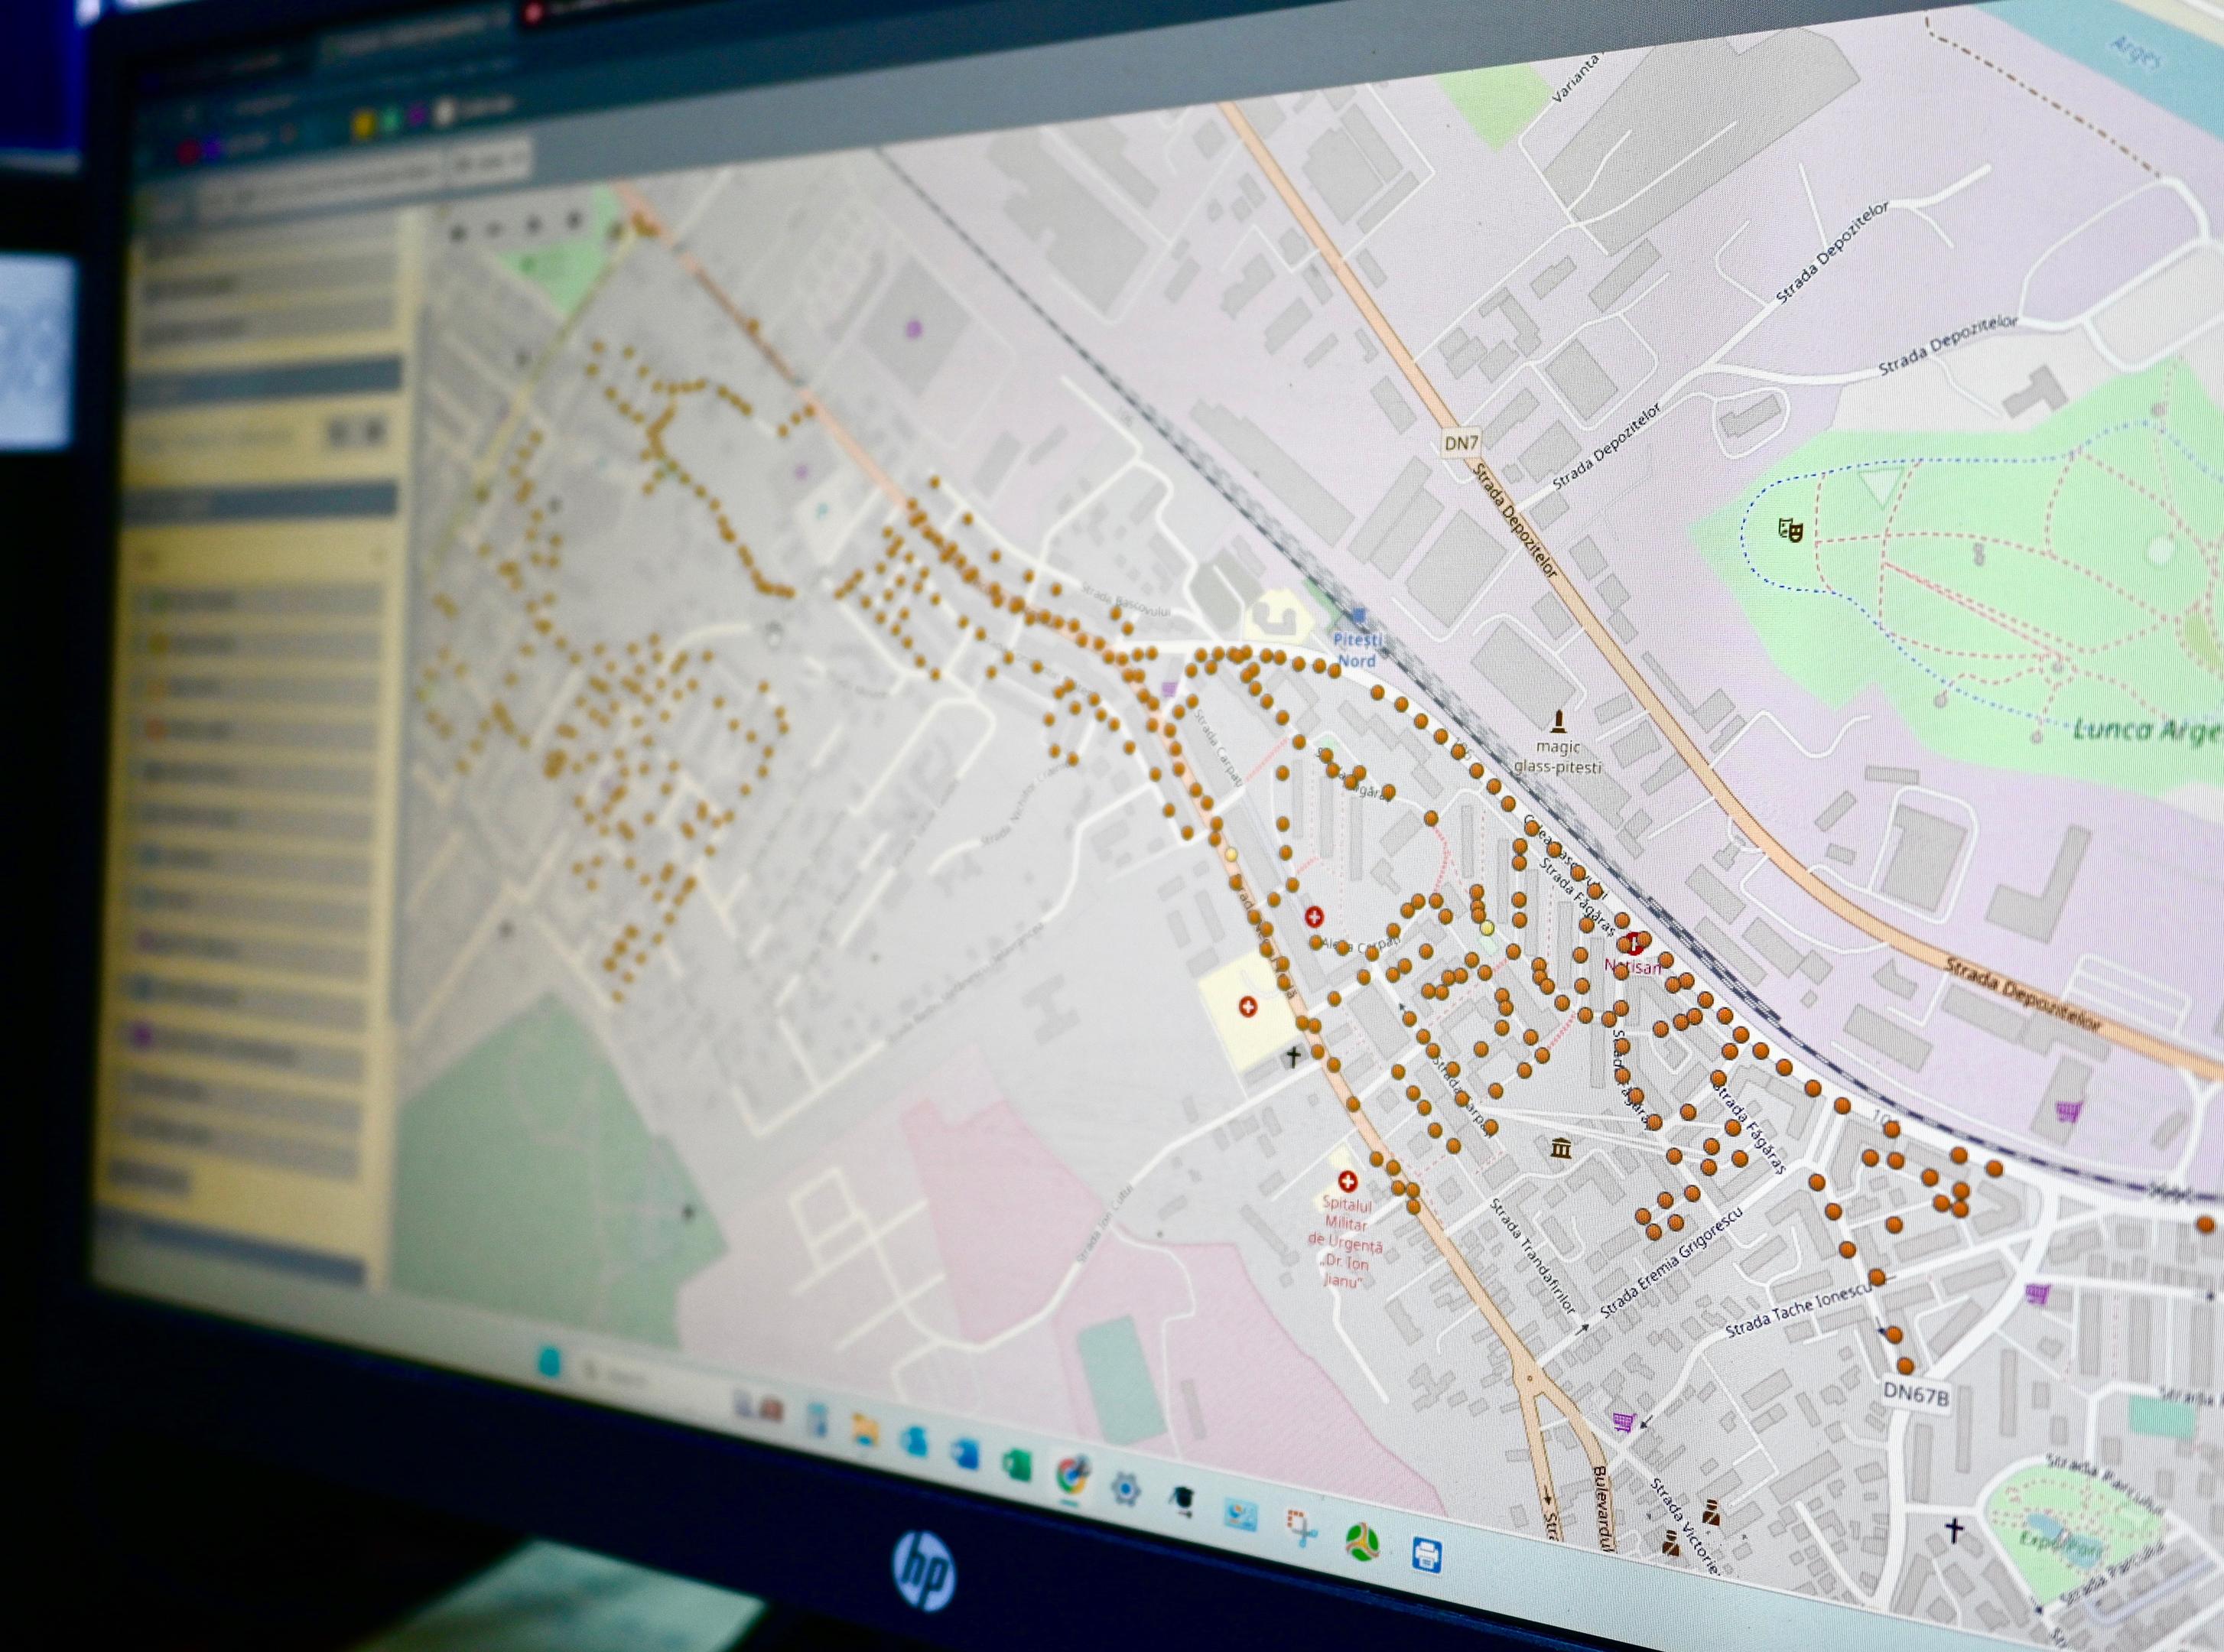 A map controlling the different street lights. A part of the project is the possibility to monitor street lightening